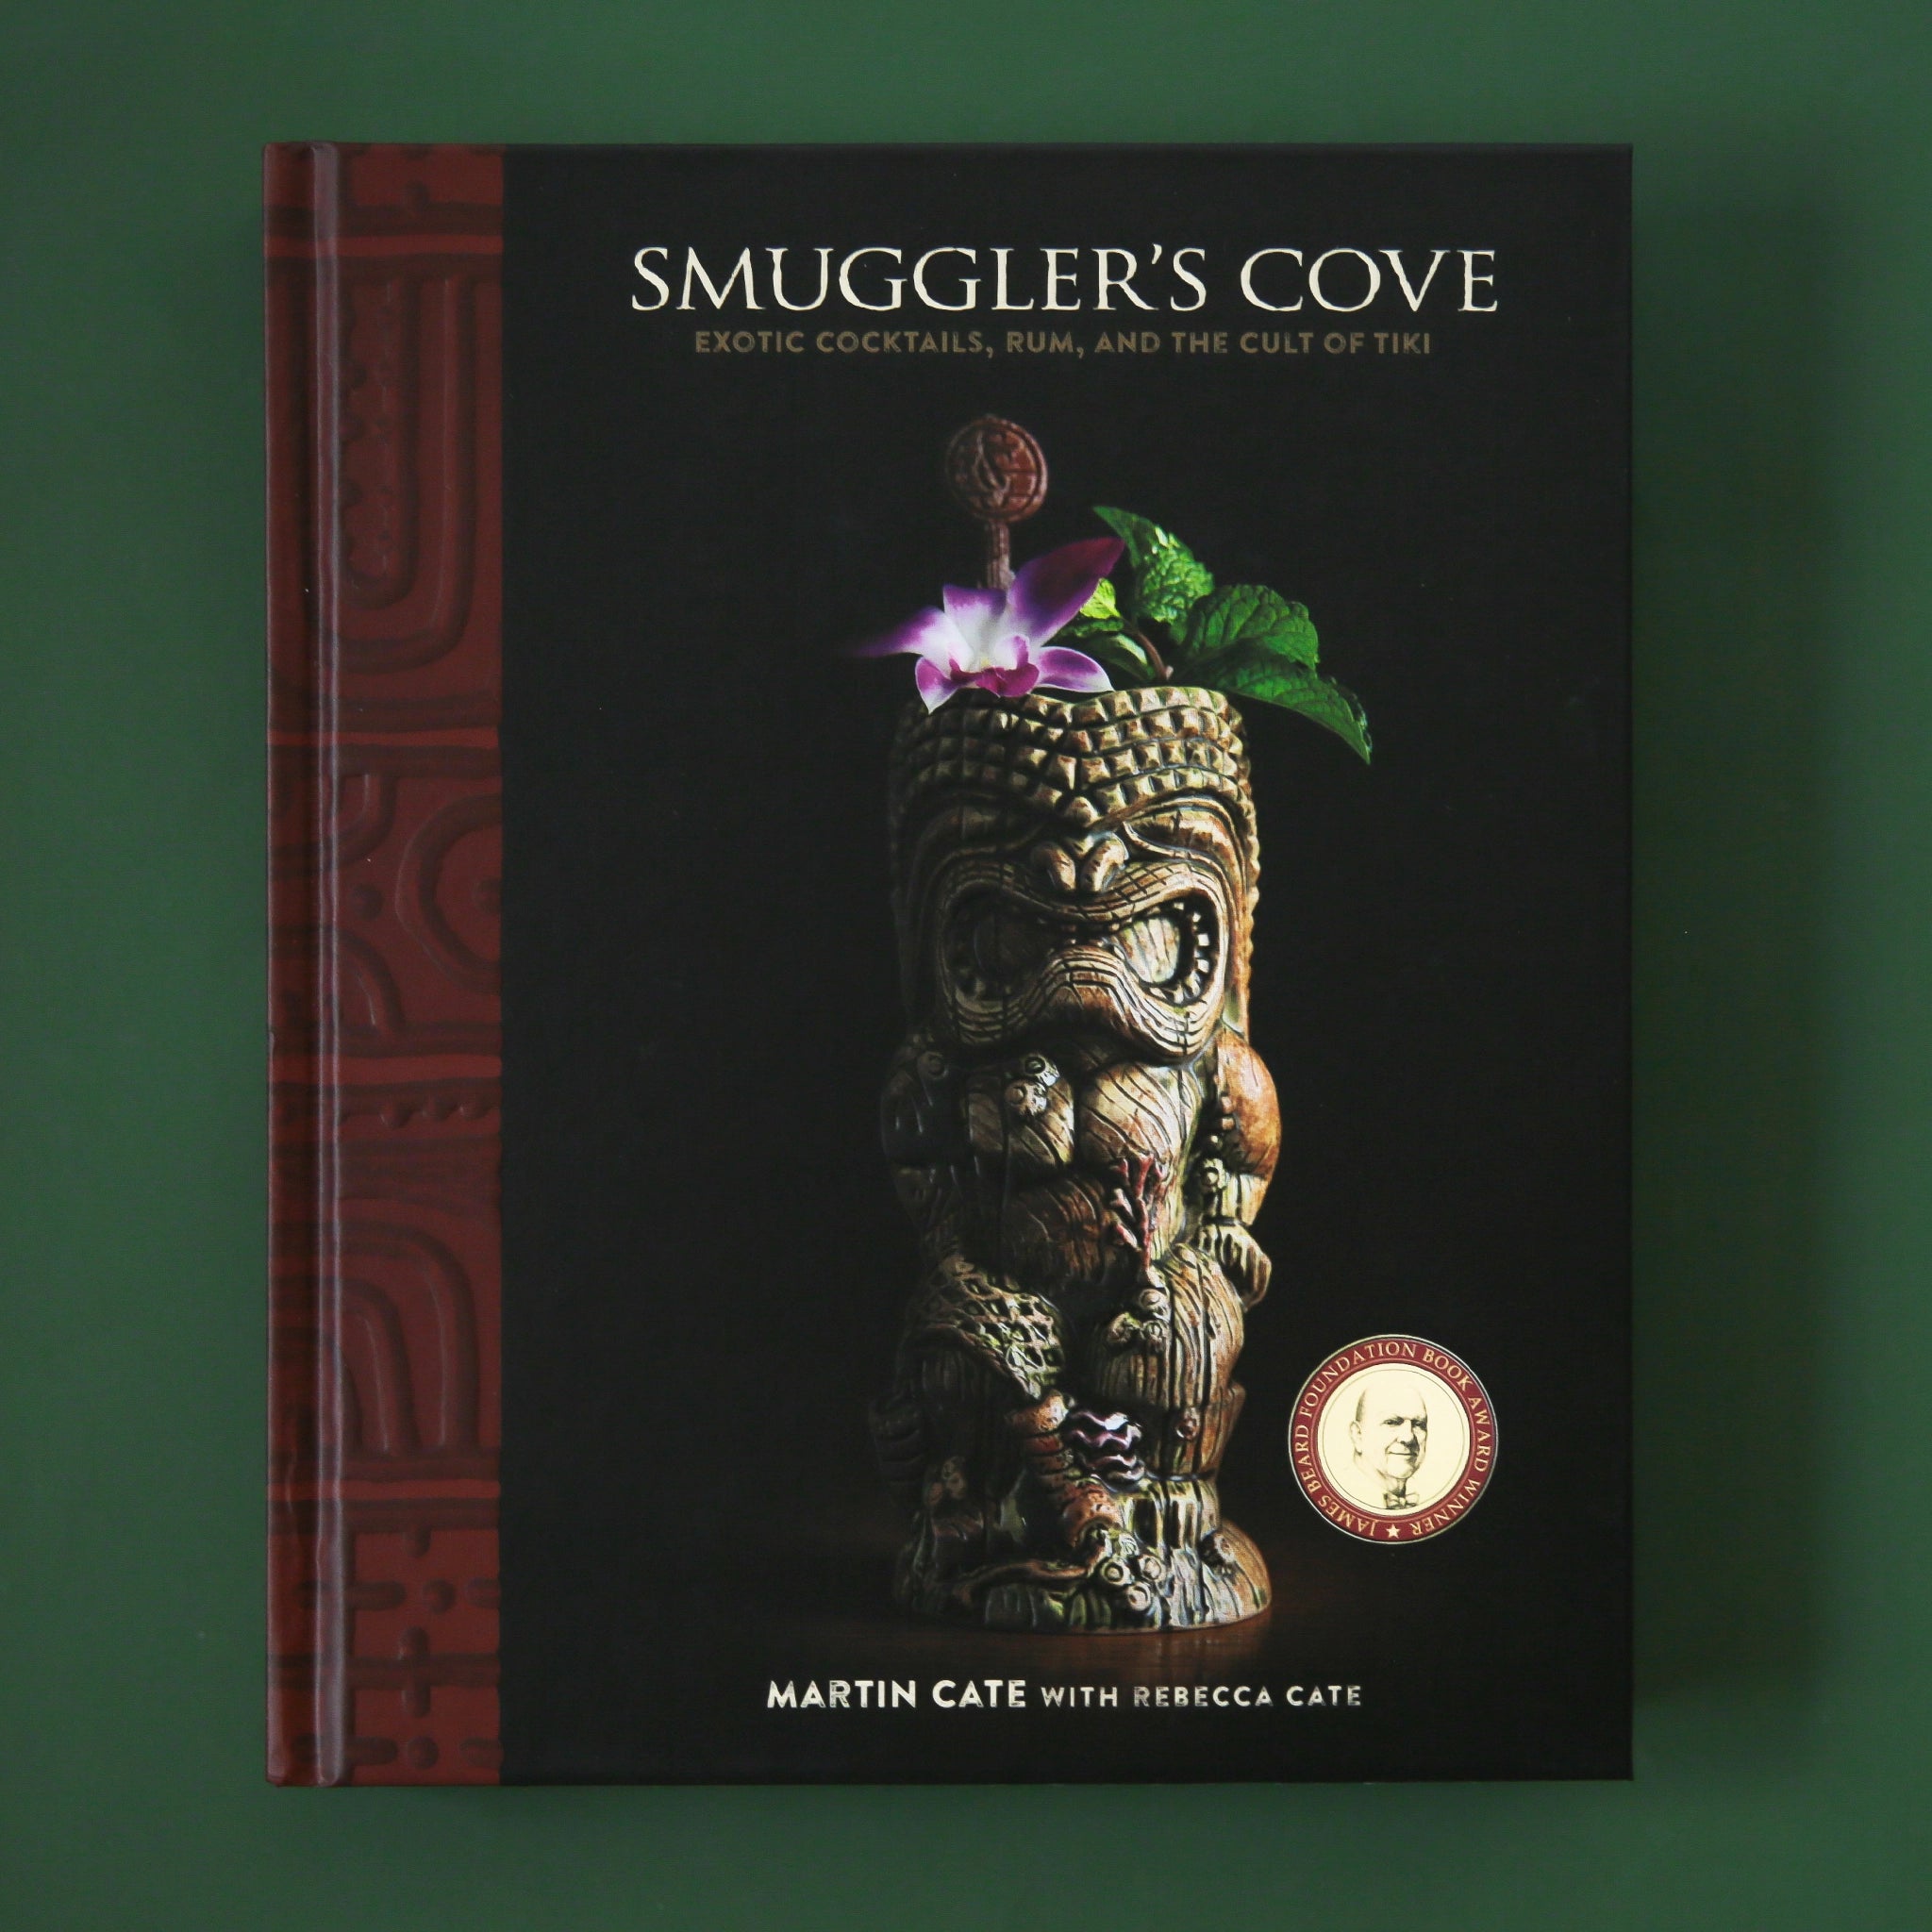 A book with a black cover that has a carved tiki on the front along with the title, "Smuggler's Cove, Exotic Cocktails, Rum and the Cult of Tiki".